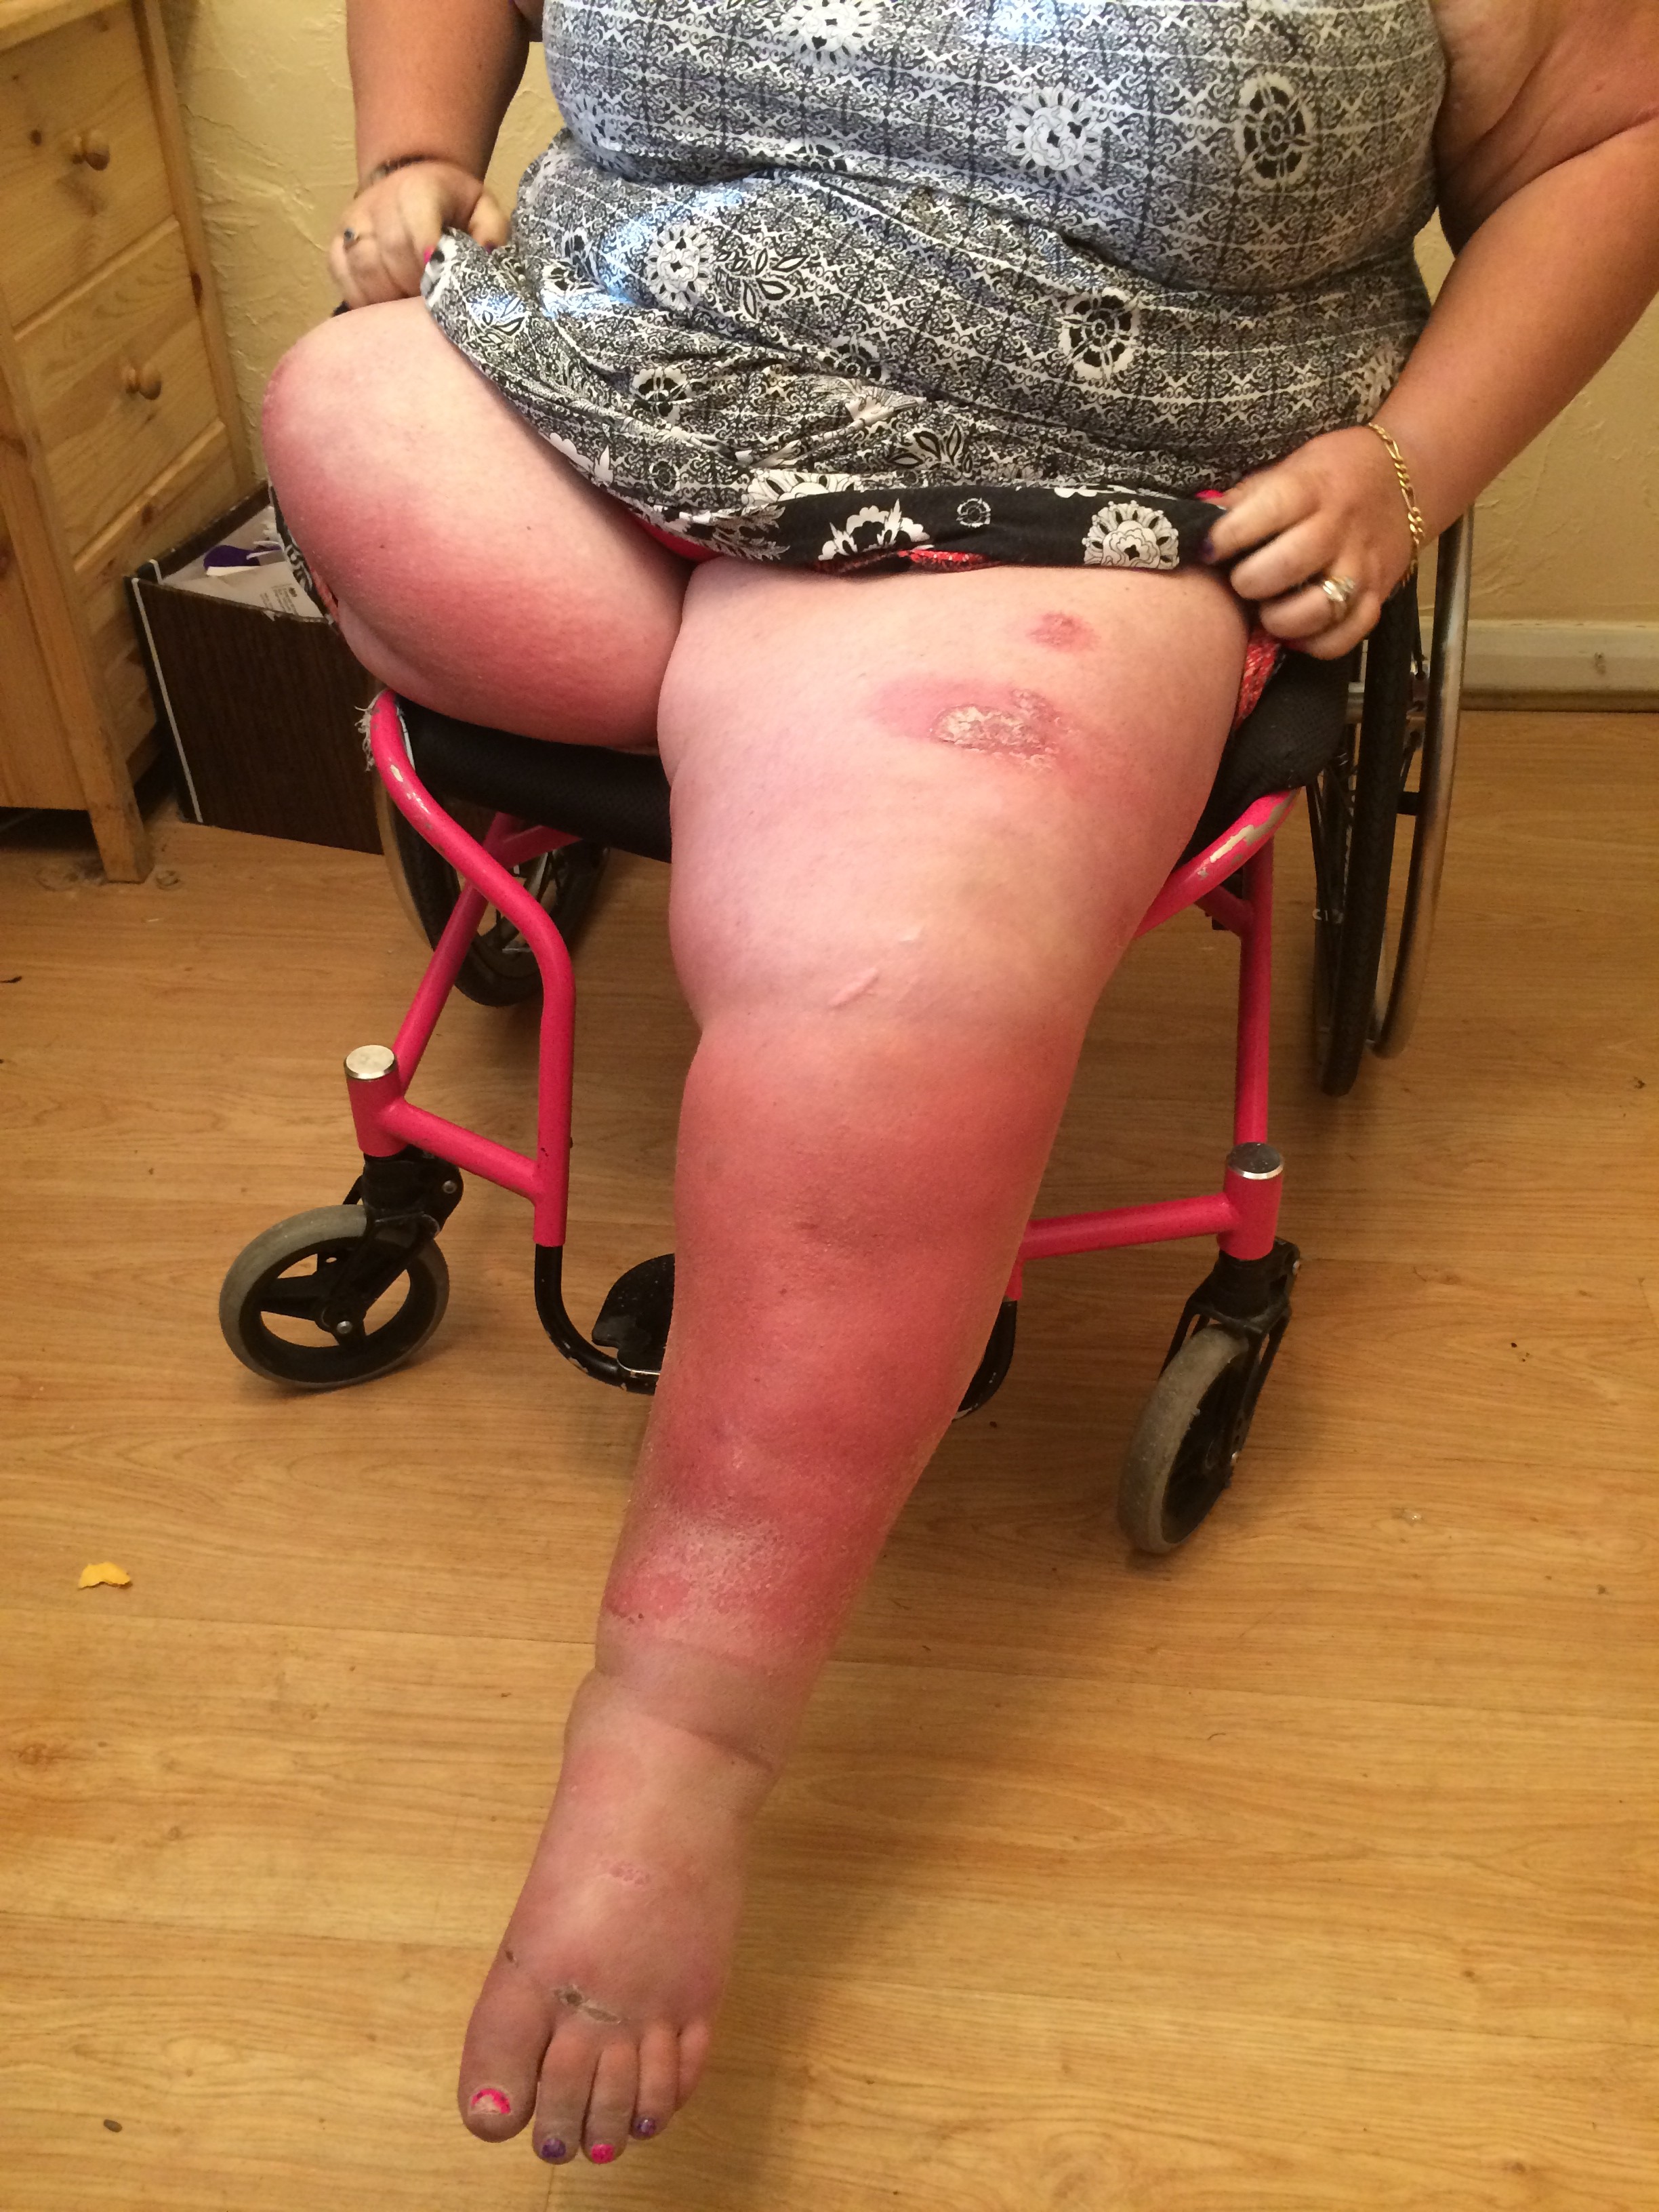 Left leg and stump redness, temperature changes in both sides